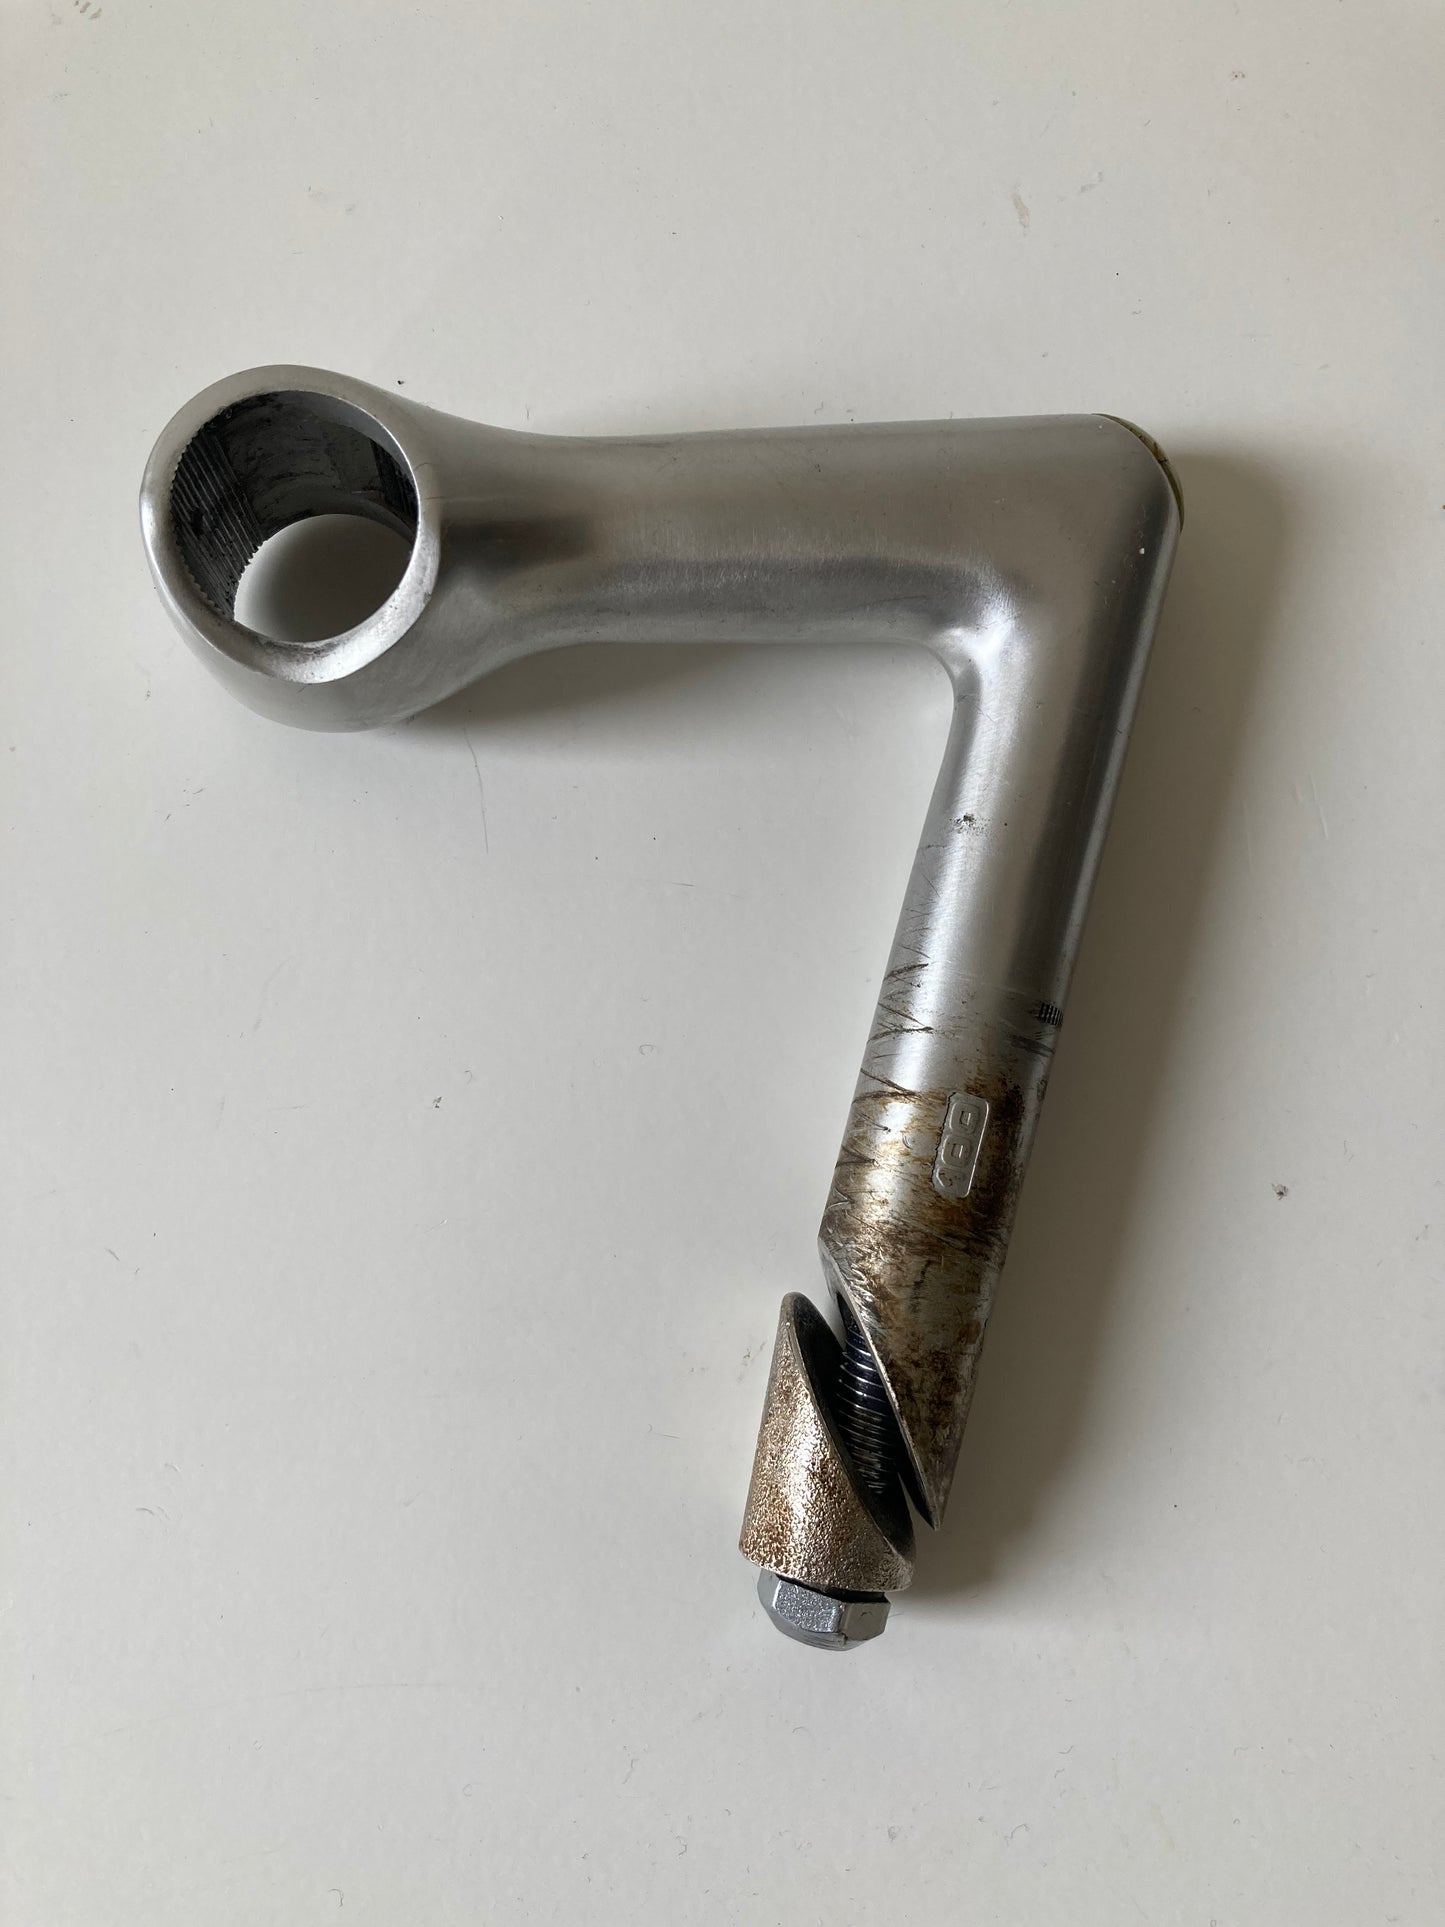 Shimano 600 AX quil stem